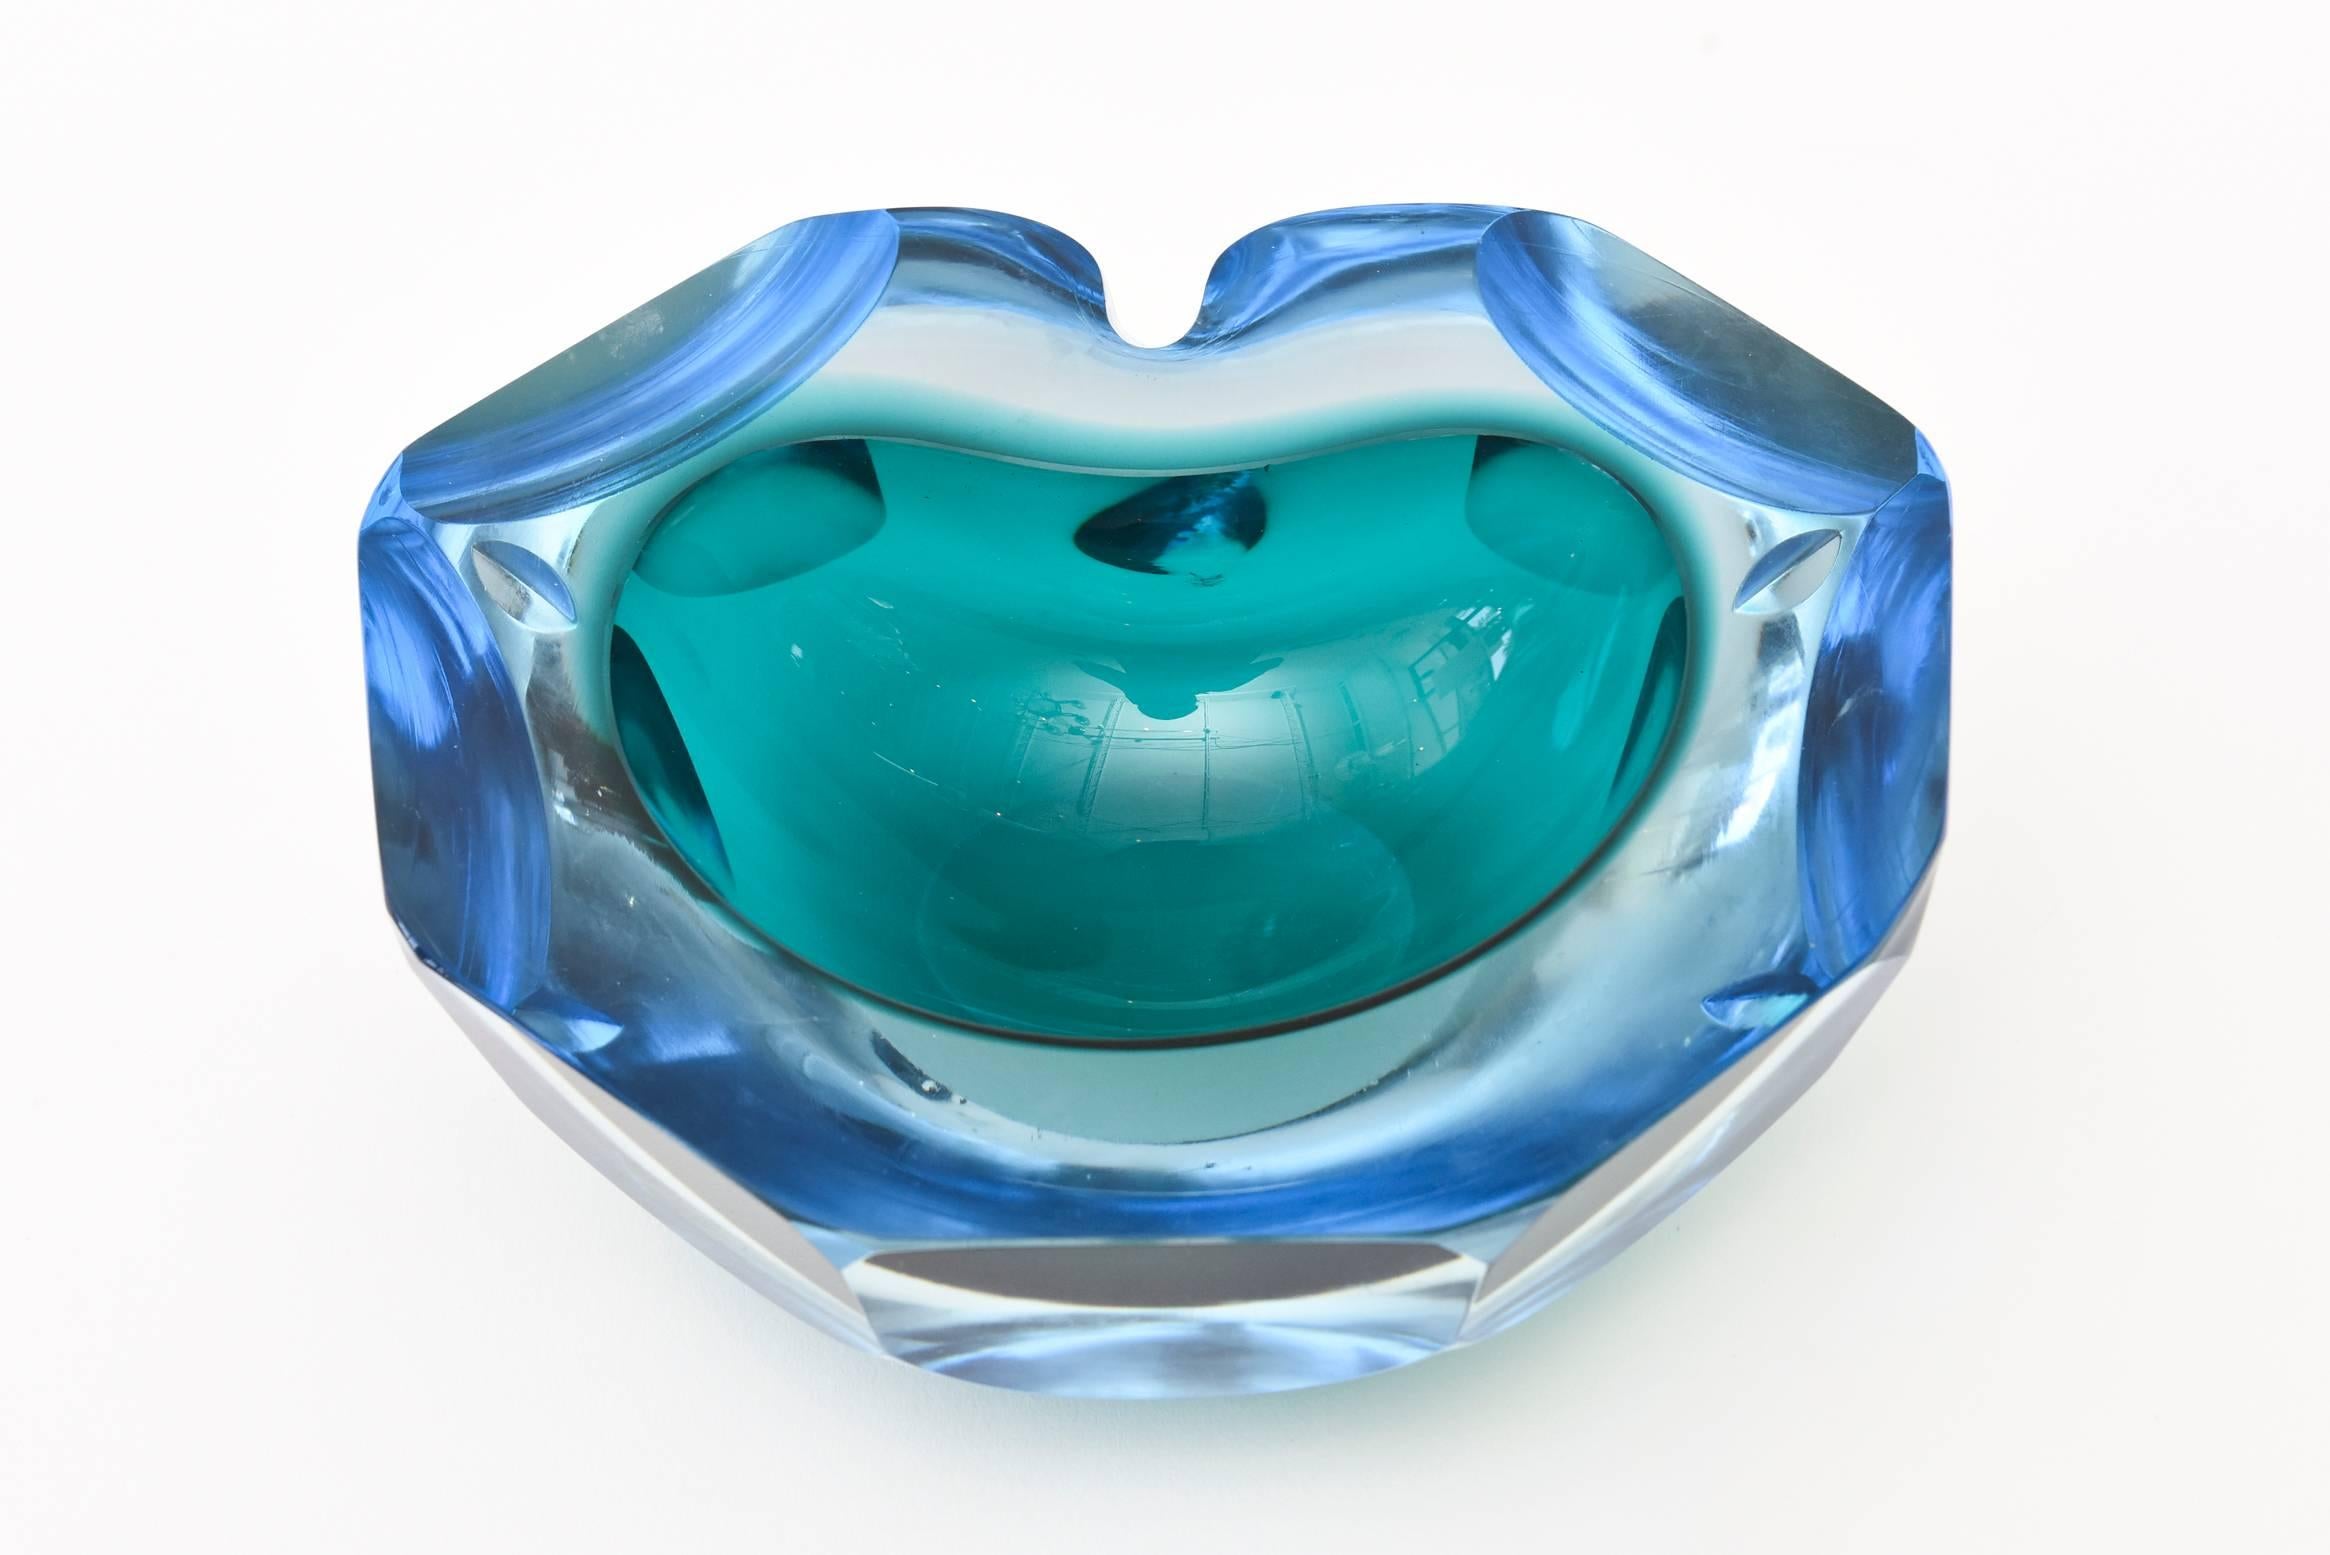 This large, substantial and beautiful Italian Murano Cenedese sommerso glass bowl is like a big jewel. It is chunky and luscious in color. It is flat cut polished top and the chiseled faceted sides are dimensional.
It is faceted but not all the way